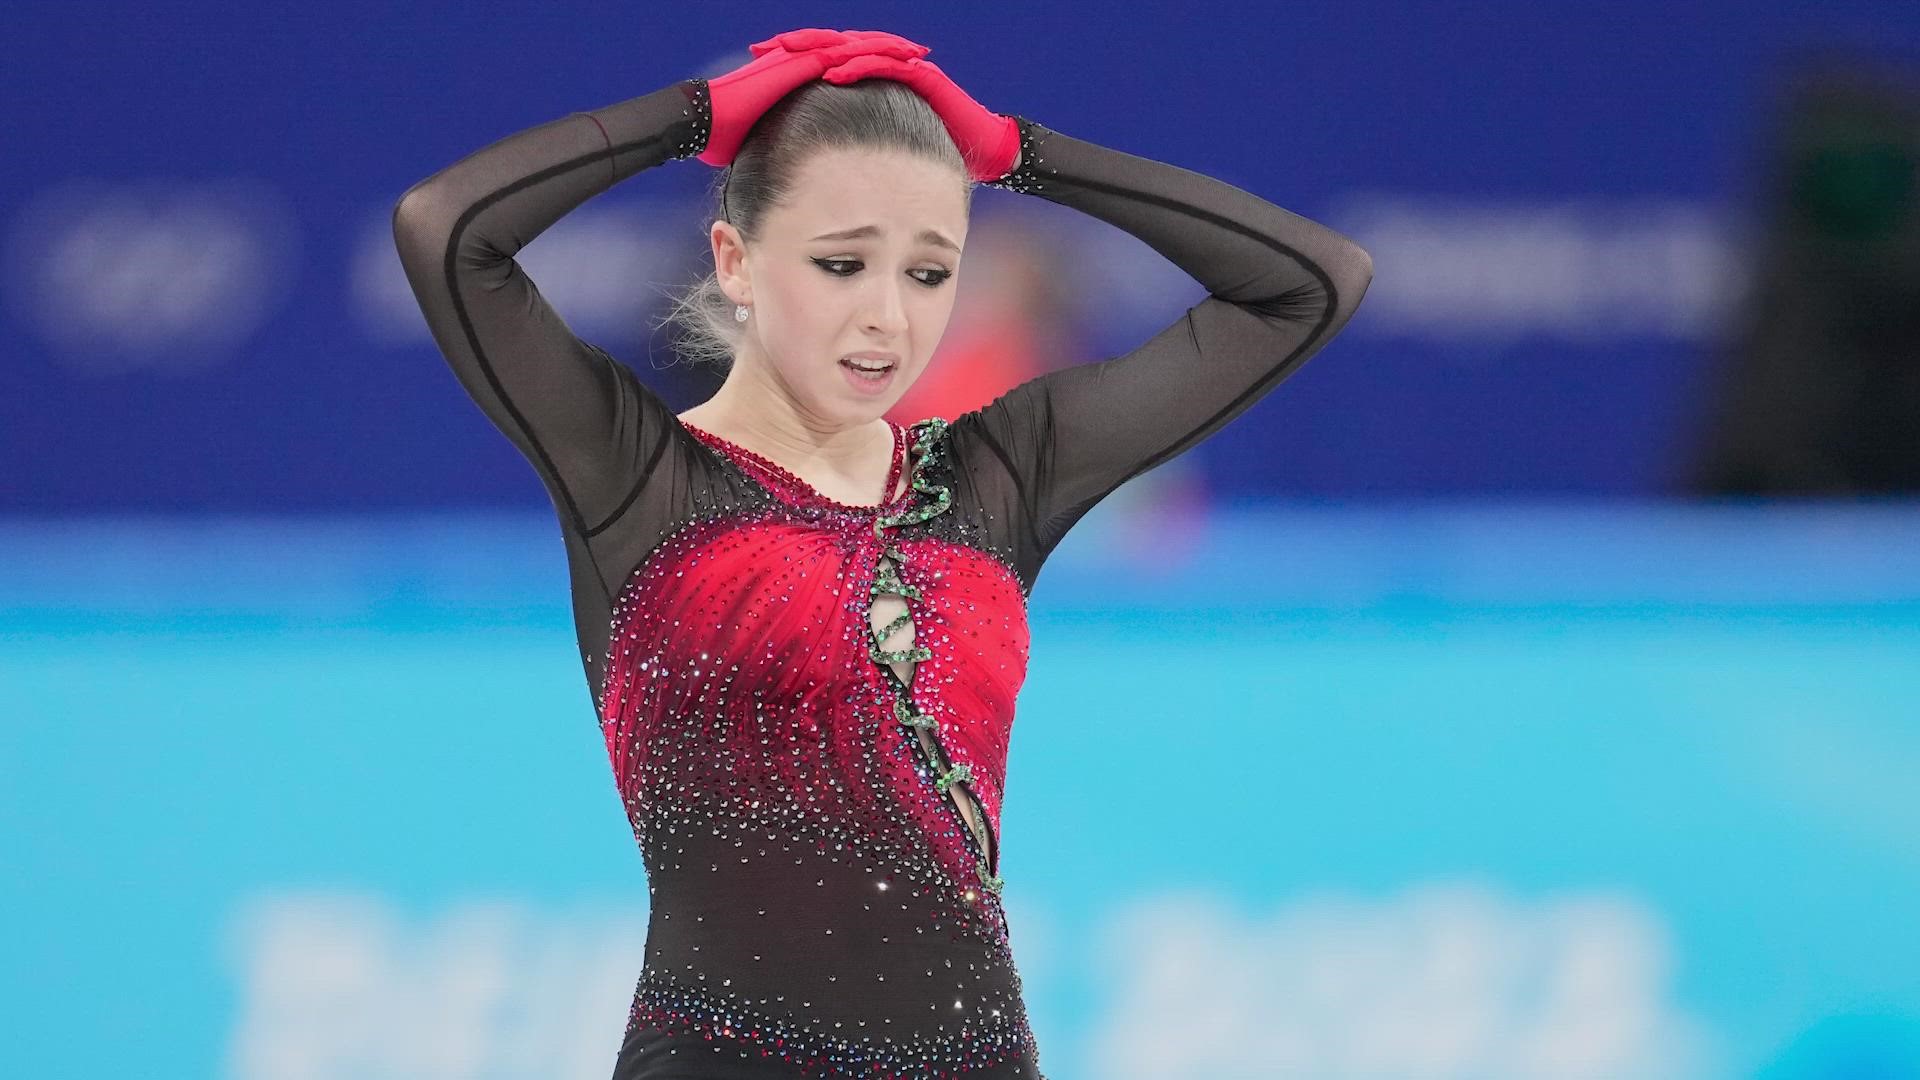 Will Kamila Valieva be able to compete in individual events in Beijing? Here's what we know so far.